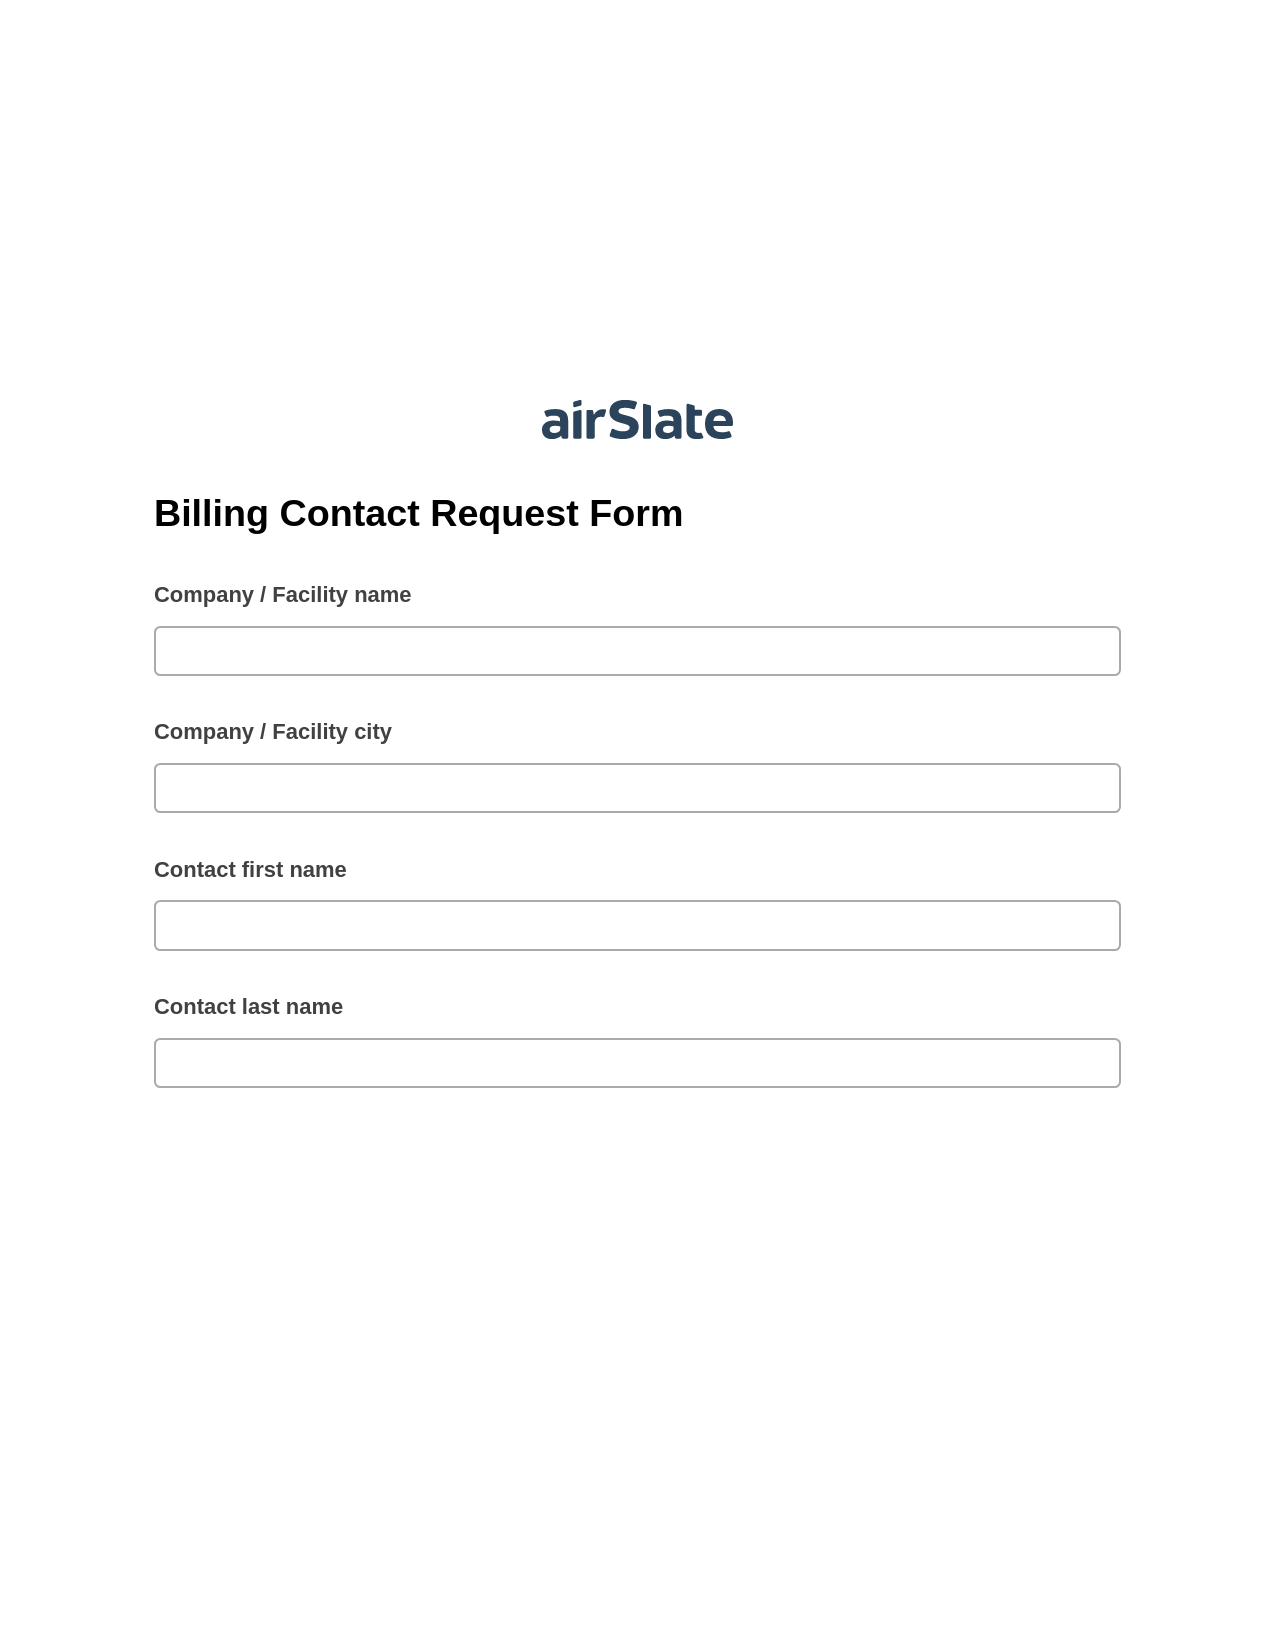 Billing Contact Request Form System Bot - Slack Two-Way Binding Bot, Create MS Dynamics 365 Records Bot, Webhook Postfinish Bot